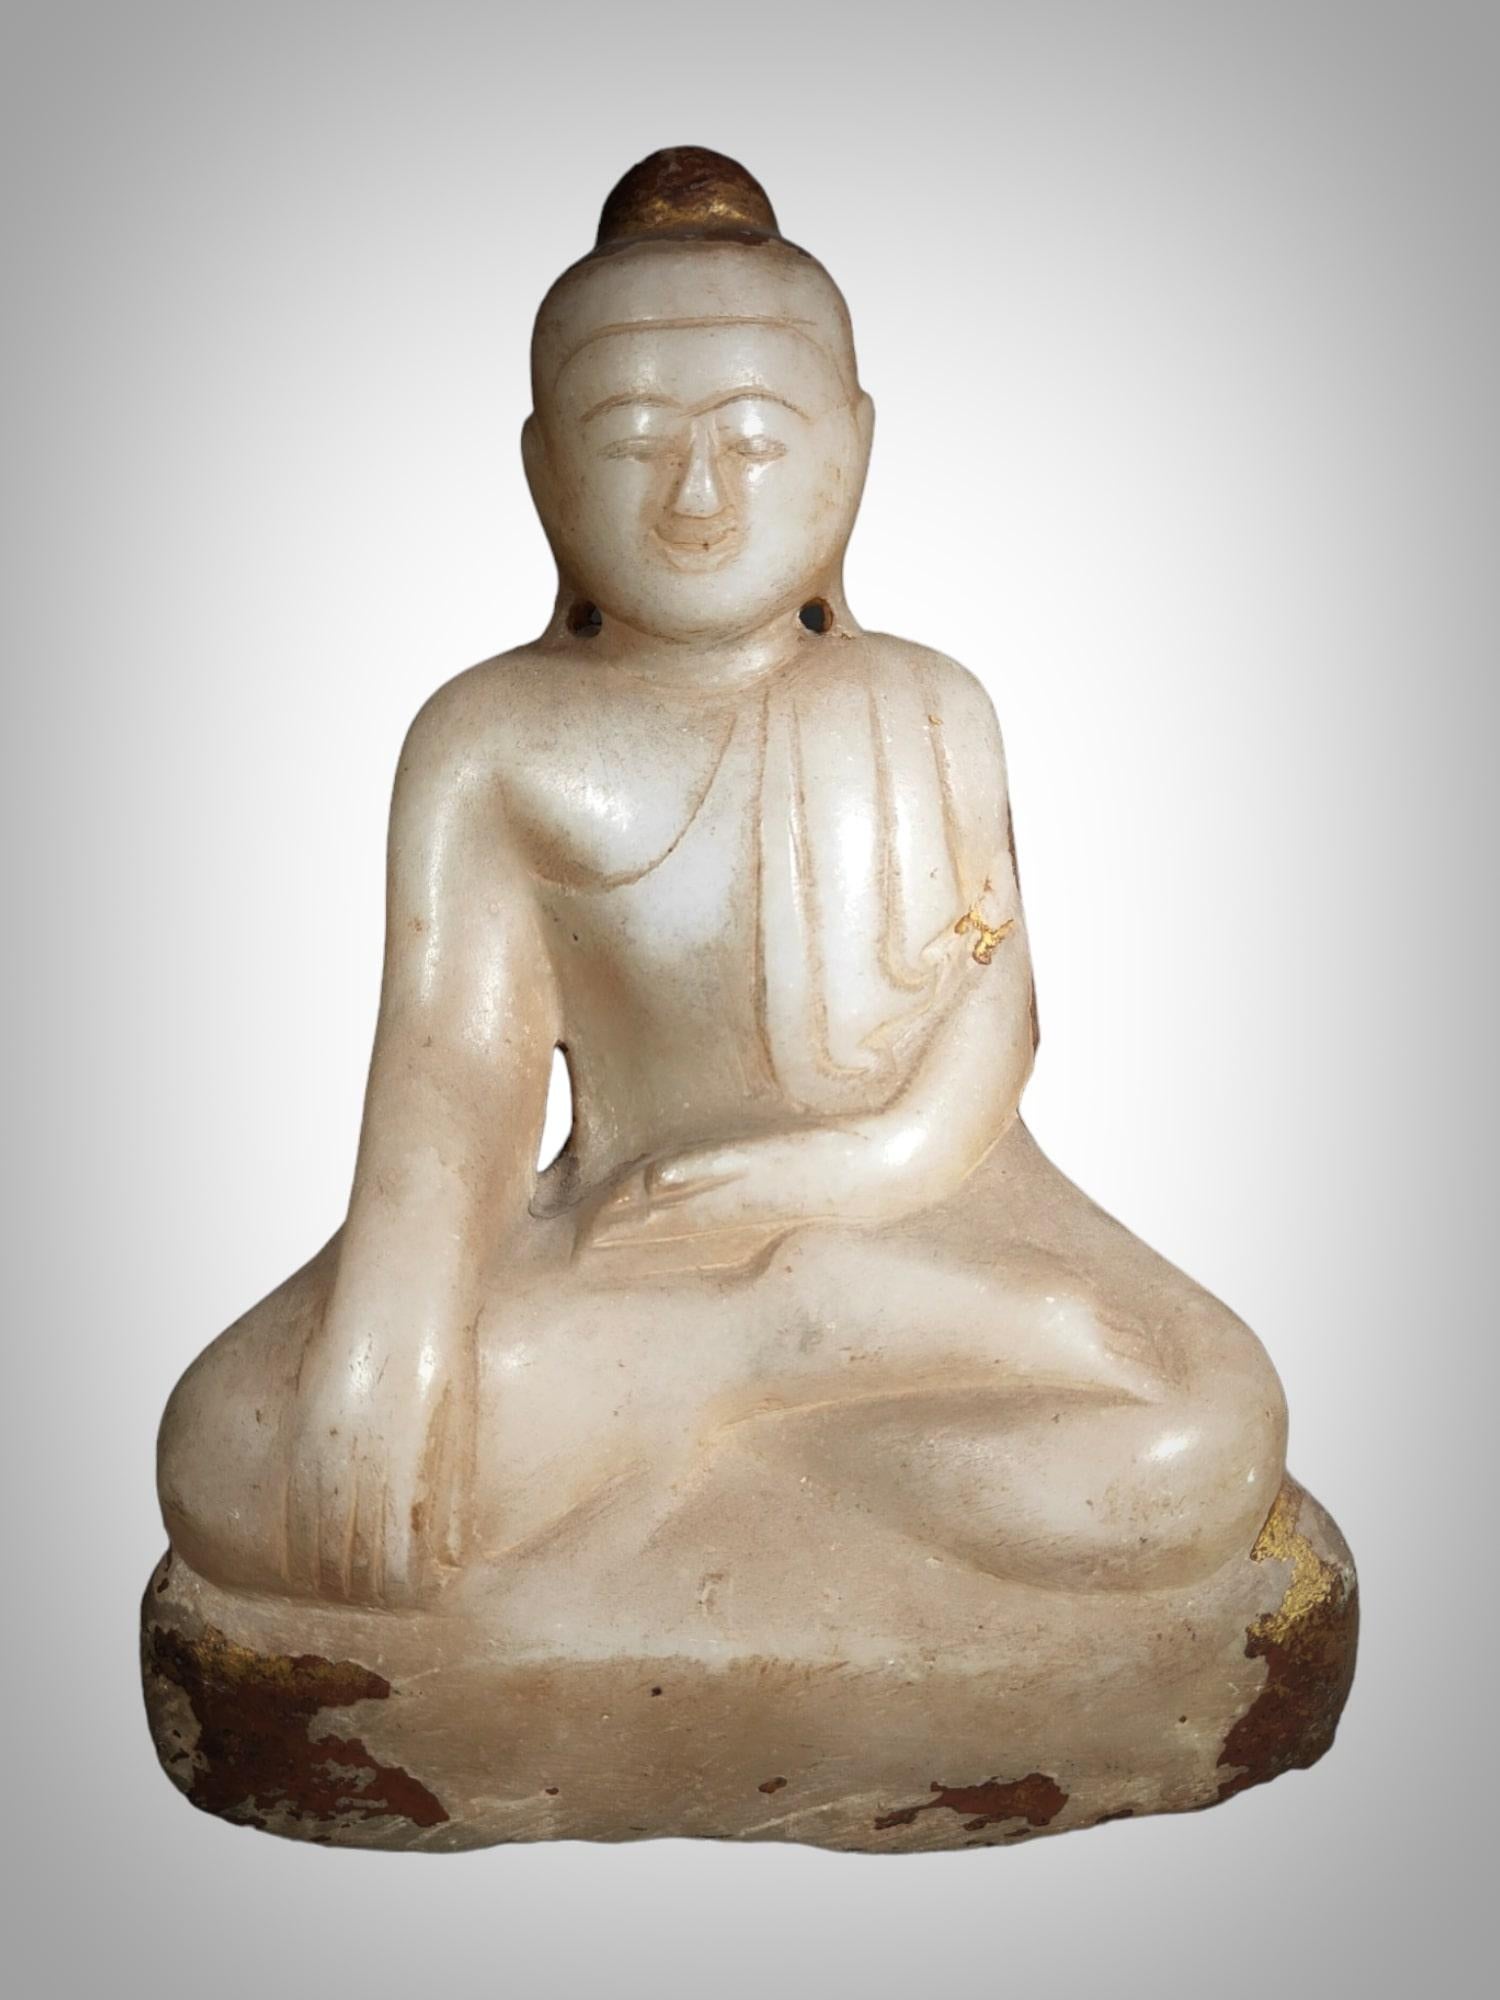 Material: Alabaster
Origin: Asia
Era: 19th Century
Dimensions: 30 x 20 x 10 cm
Features and Details:
This magnificent Buddha carved in alabaster dates back to the 19th century and shows traces of polychrome, indicating its rich history and